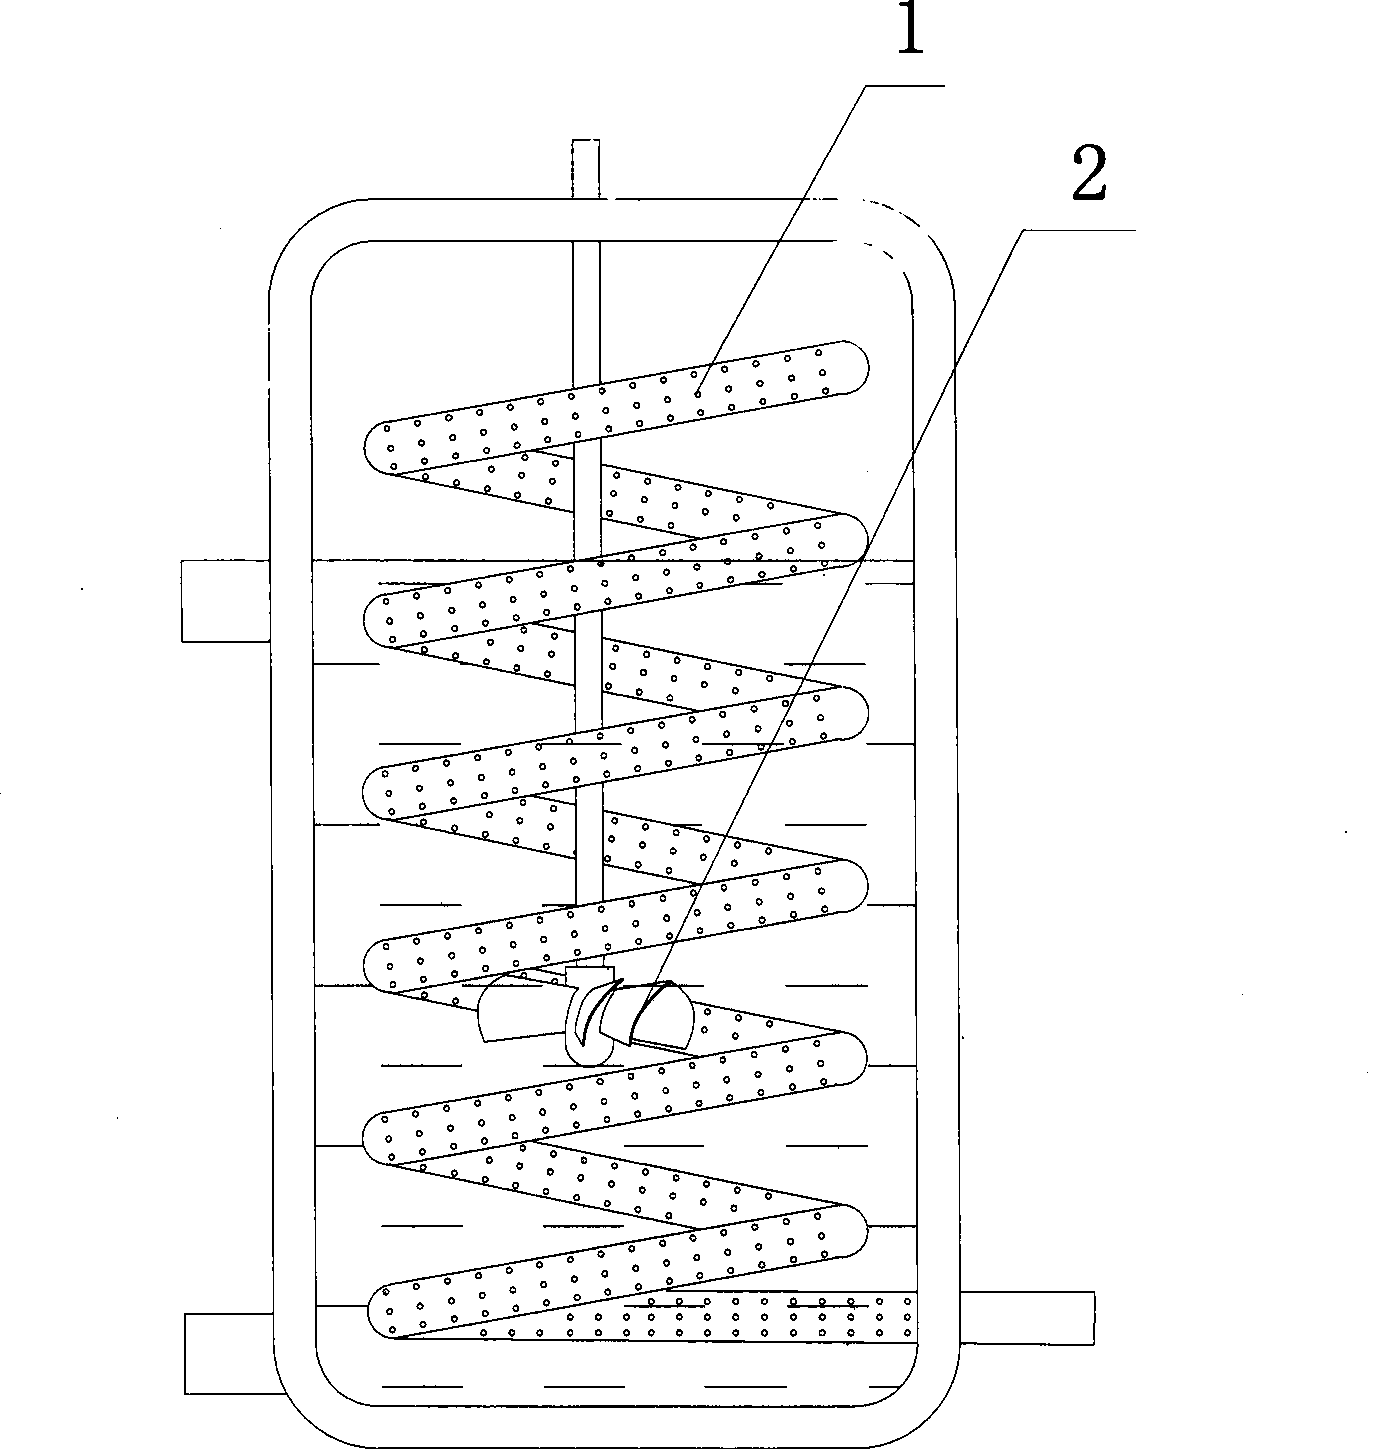 Process for producing high-purity electronic grade strontium carbonate